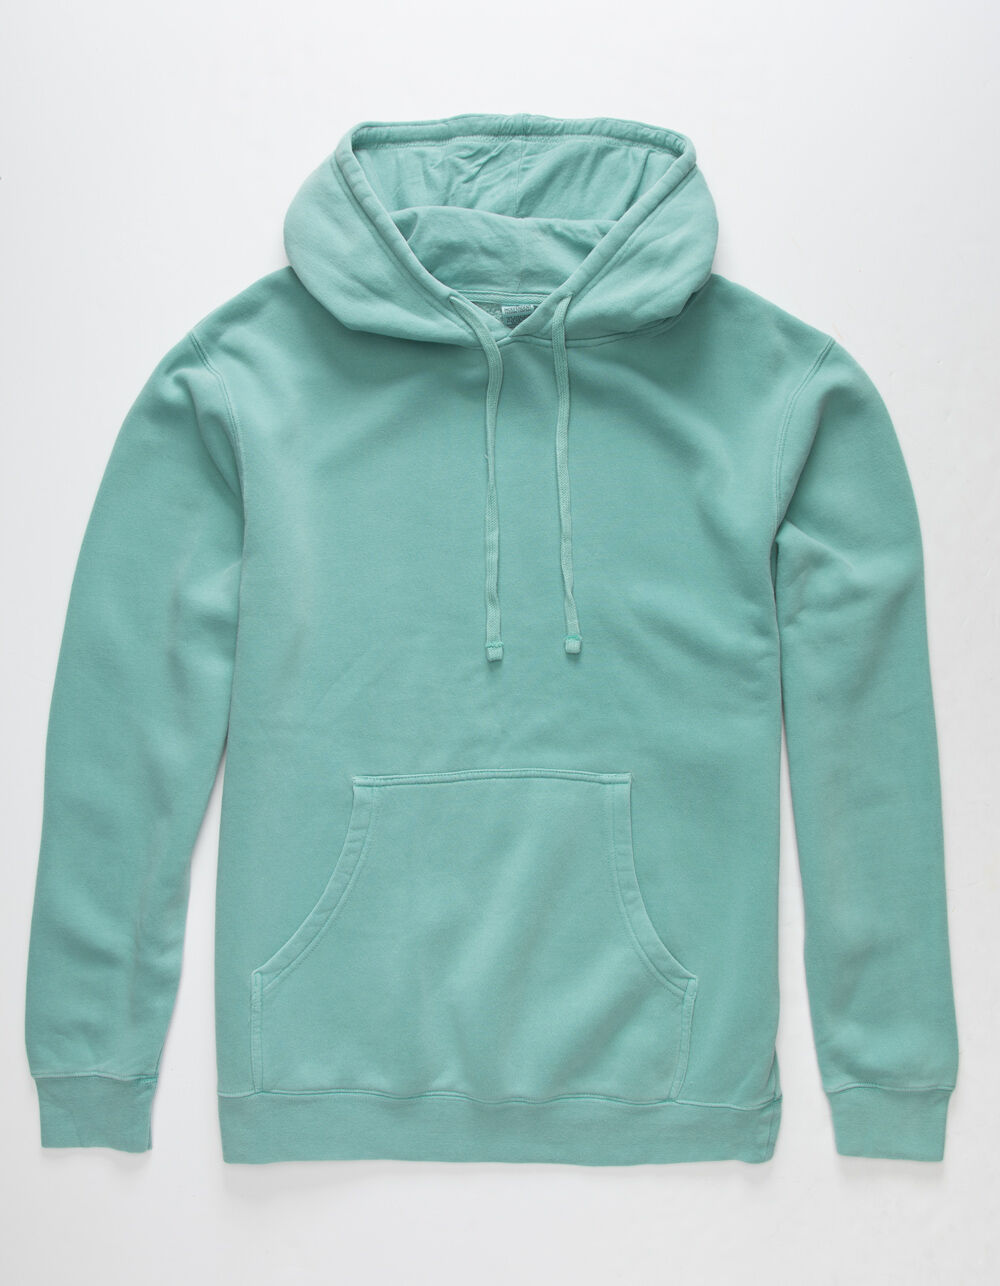 INDEPENDENT TRADING COMPANY Pigment Dye Mens Green Hoodie - GREEN | Tillys